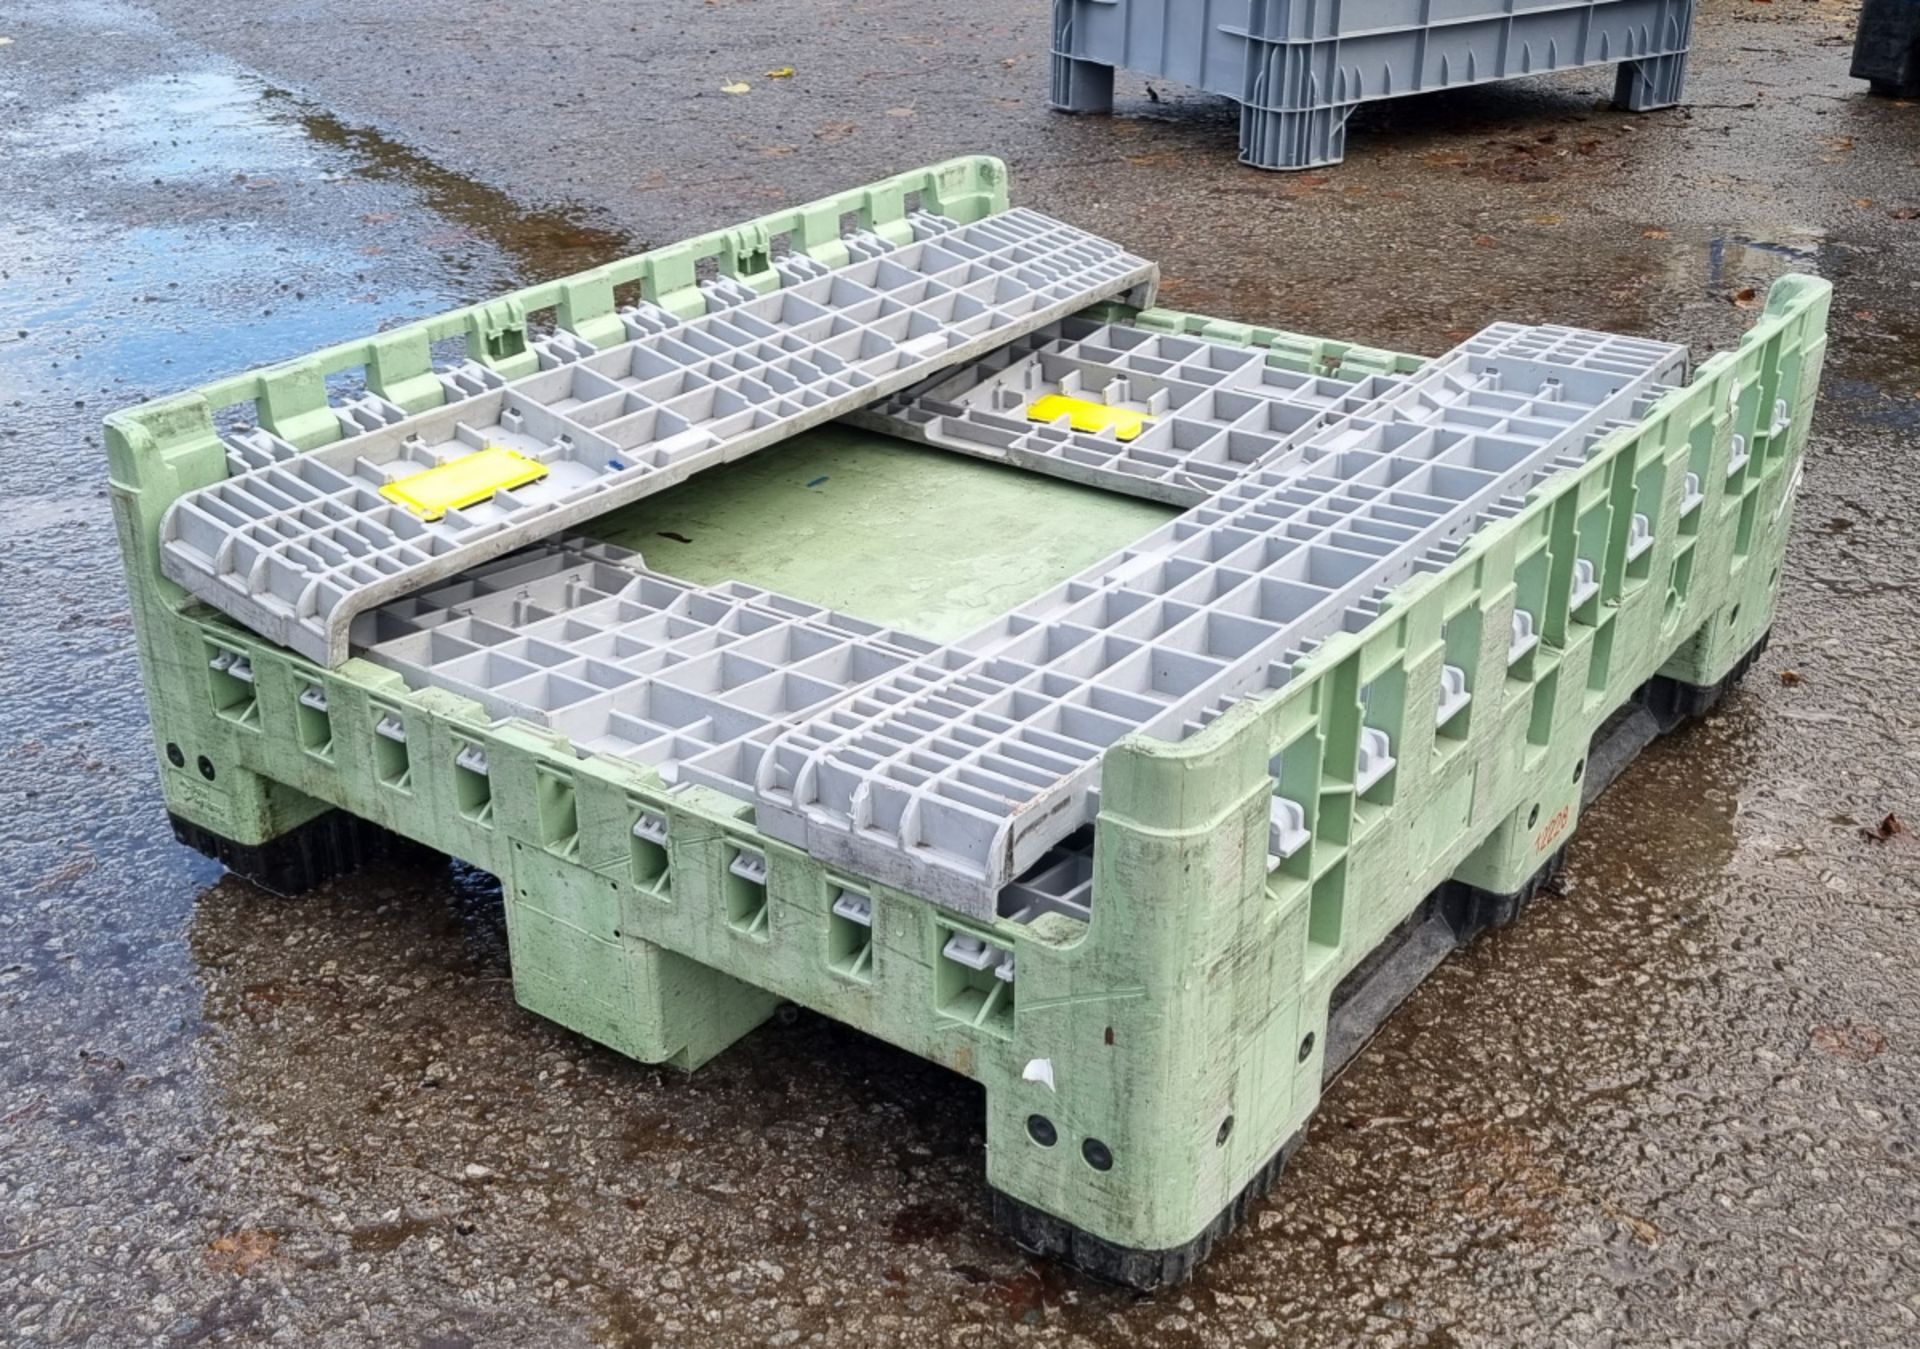 5x Collapsible plastic pallets - L120 x W100 x H59.5cm (H37.5cm when collapsed) - Image 5 of 6